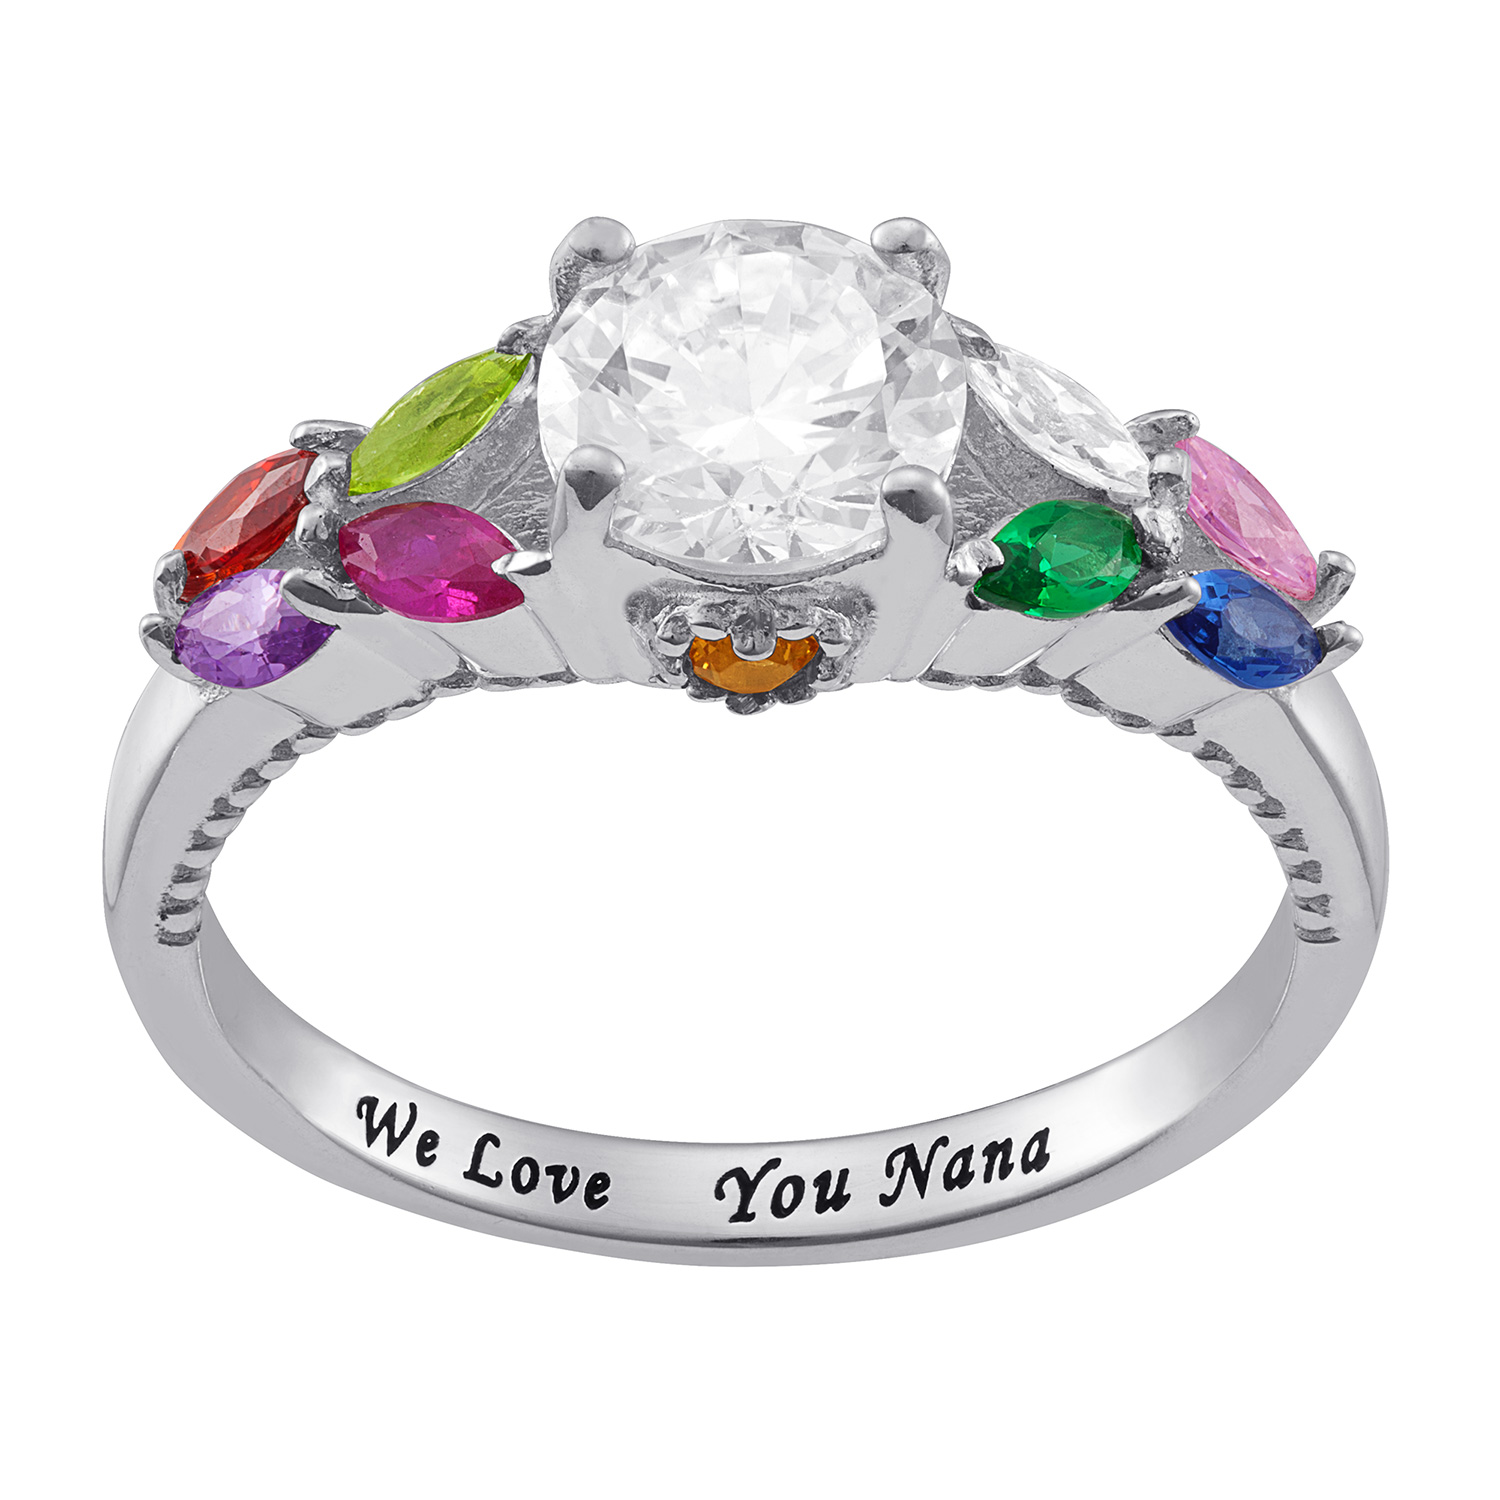 Color Stone Birthstone Ring Solitaire Simulated Alexandrite Ring Set In Sterling Silver 